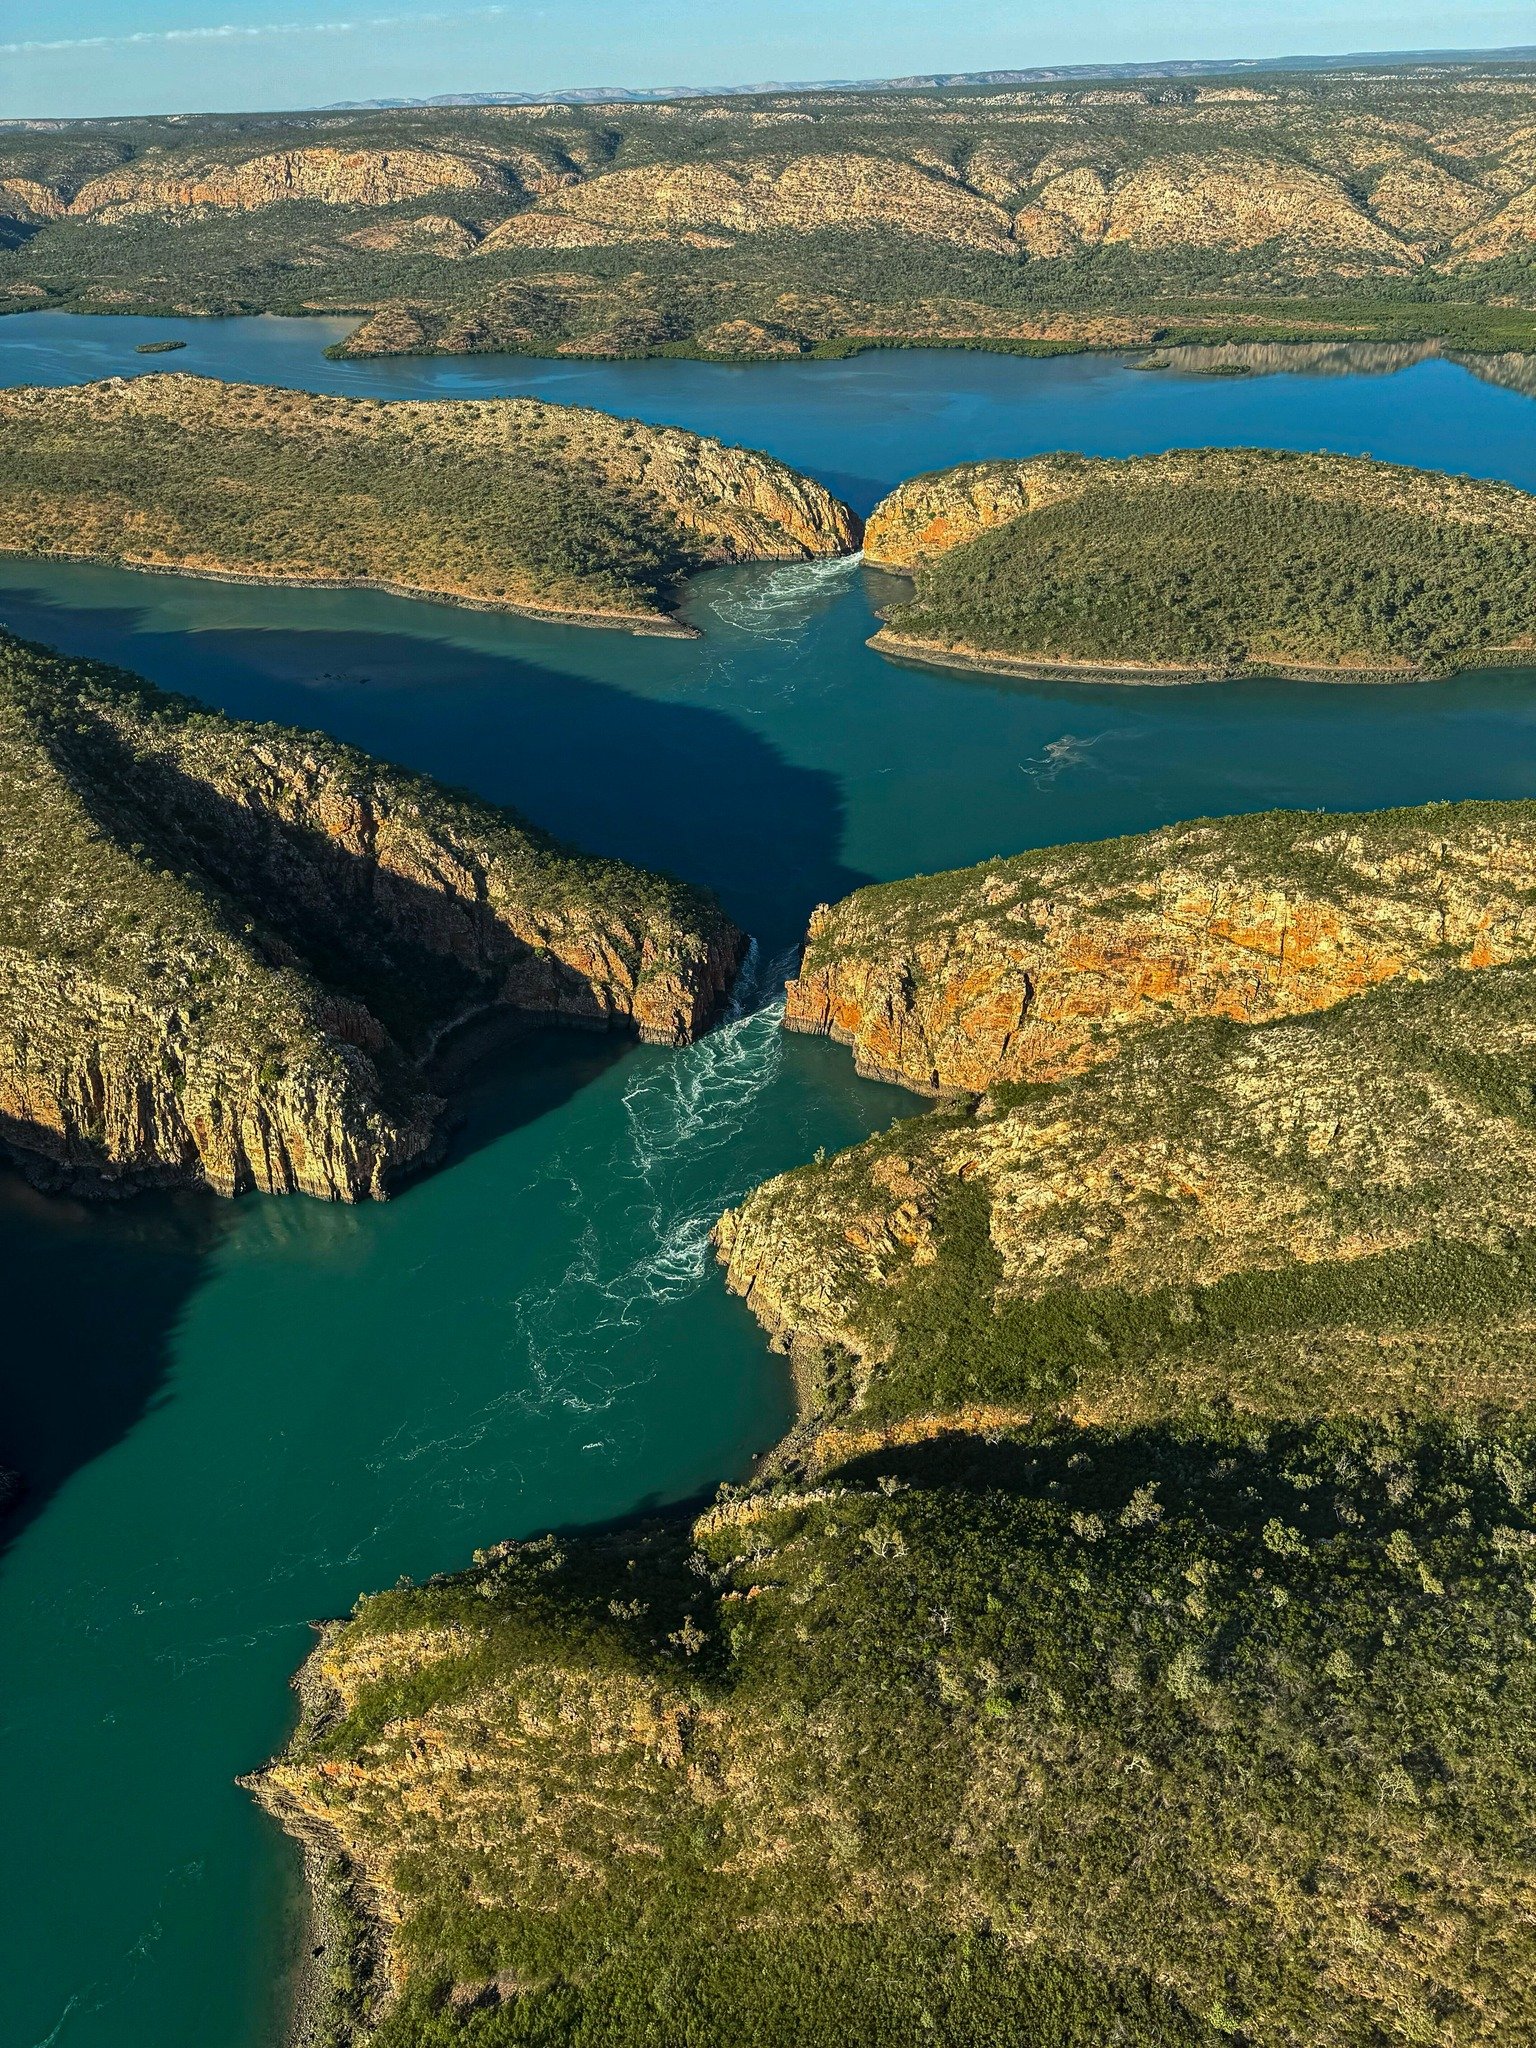 Enhance your trip to the Kimberley with a scenic helicopter flight over the world famous Horizontal Falls &amp; Buccaneer Archipelago 🚁

In this 90-minute flight, you'll see the vibrant colours and dynamic landscapes of the iconic Horizontal Falls a